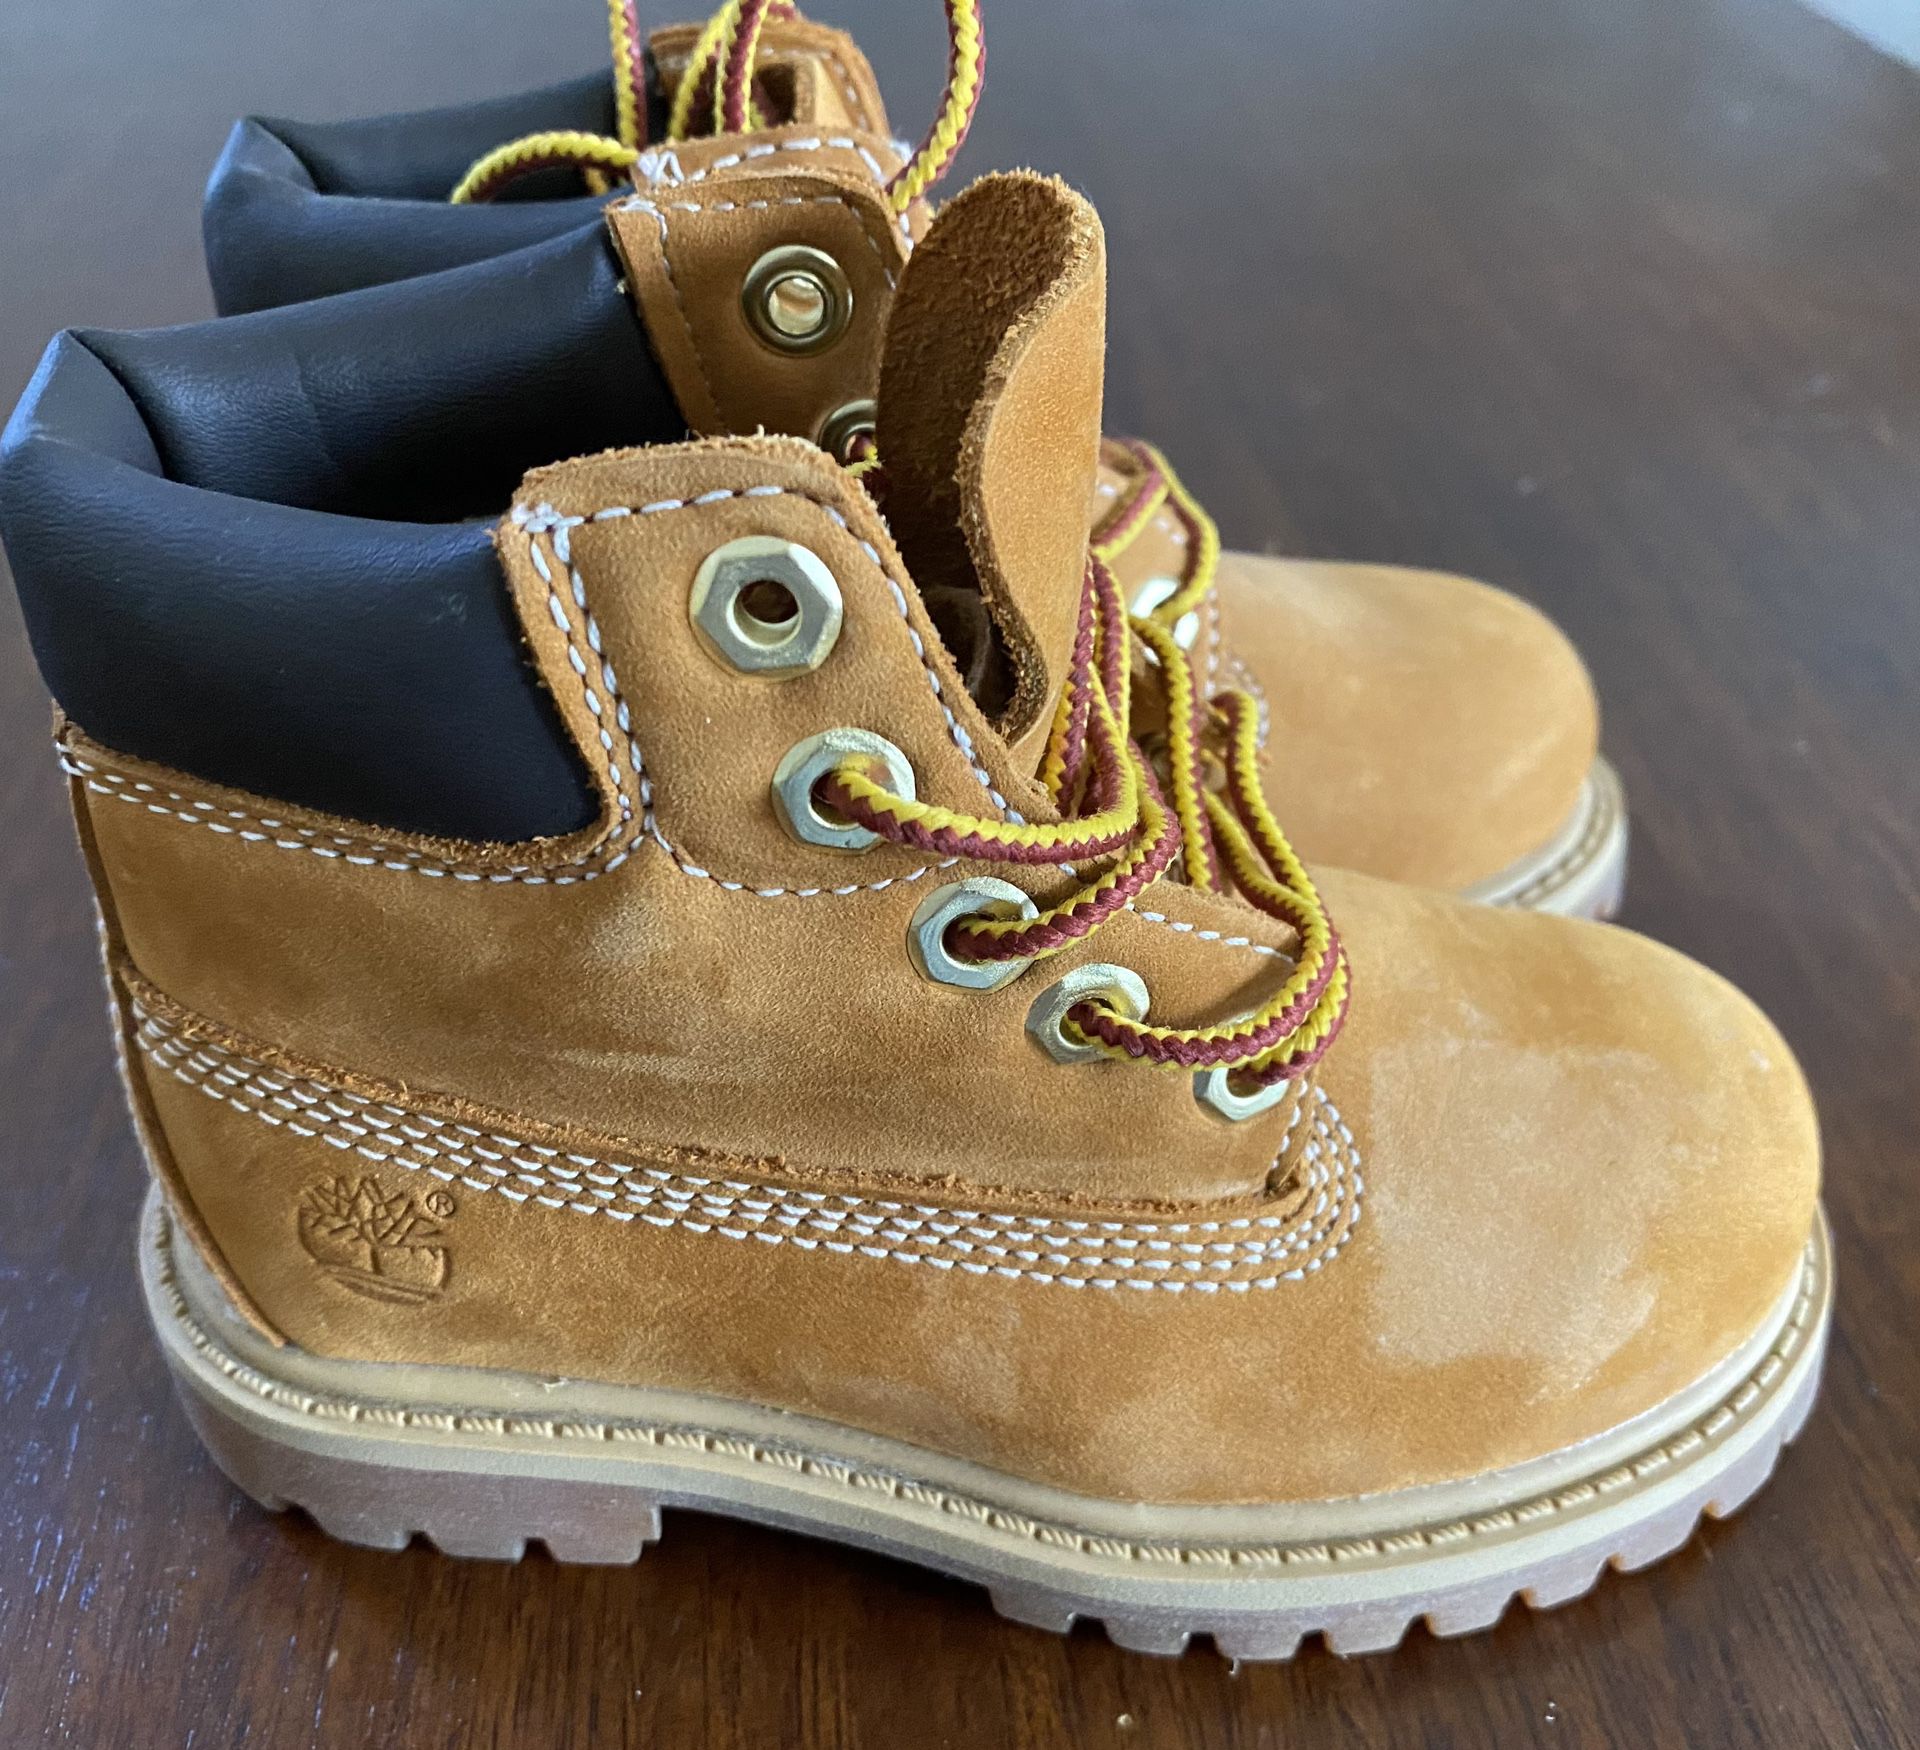 Wheat Timberlands Size 7 Toddlers